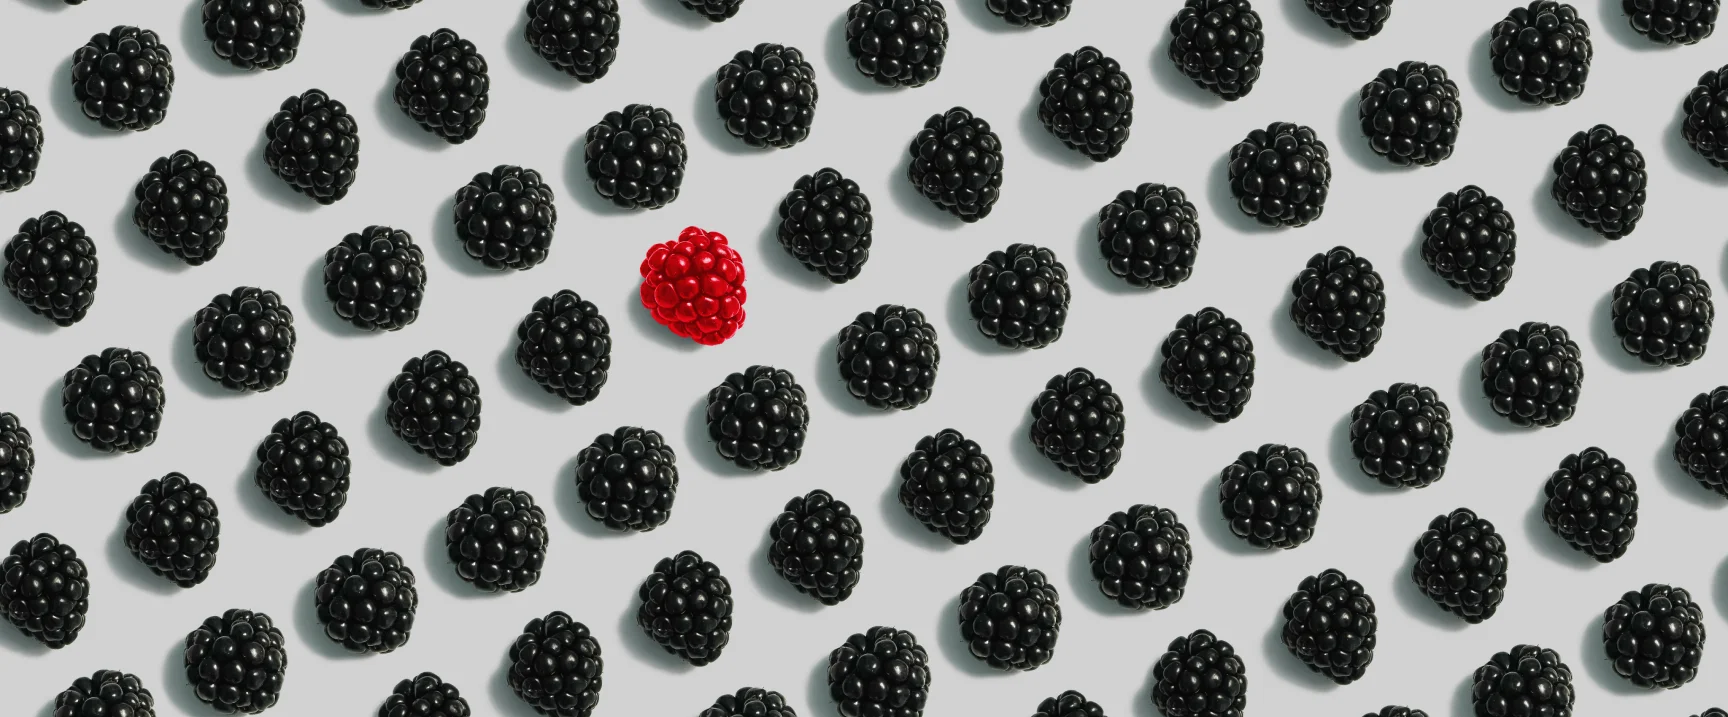 Black berries with one single red berry - for partner digital marketing services